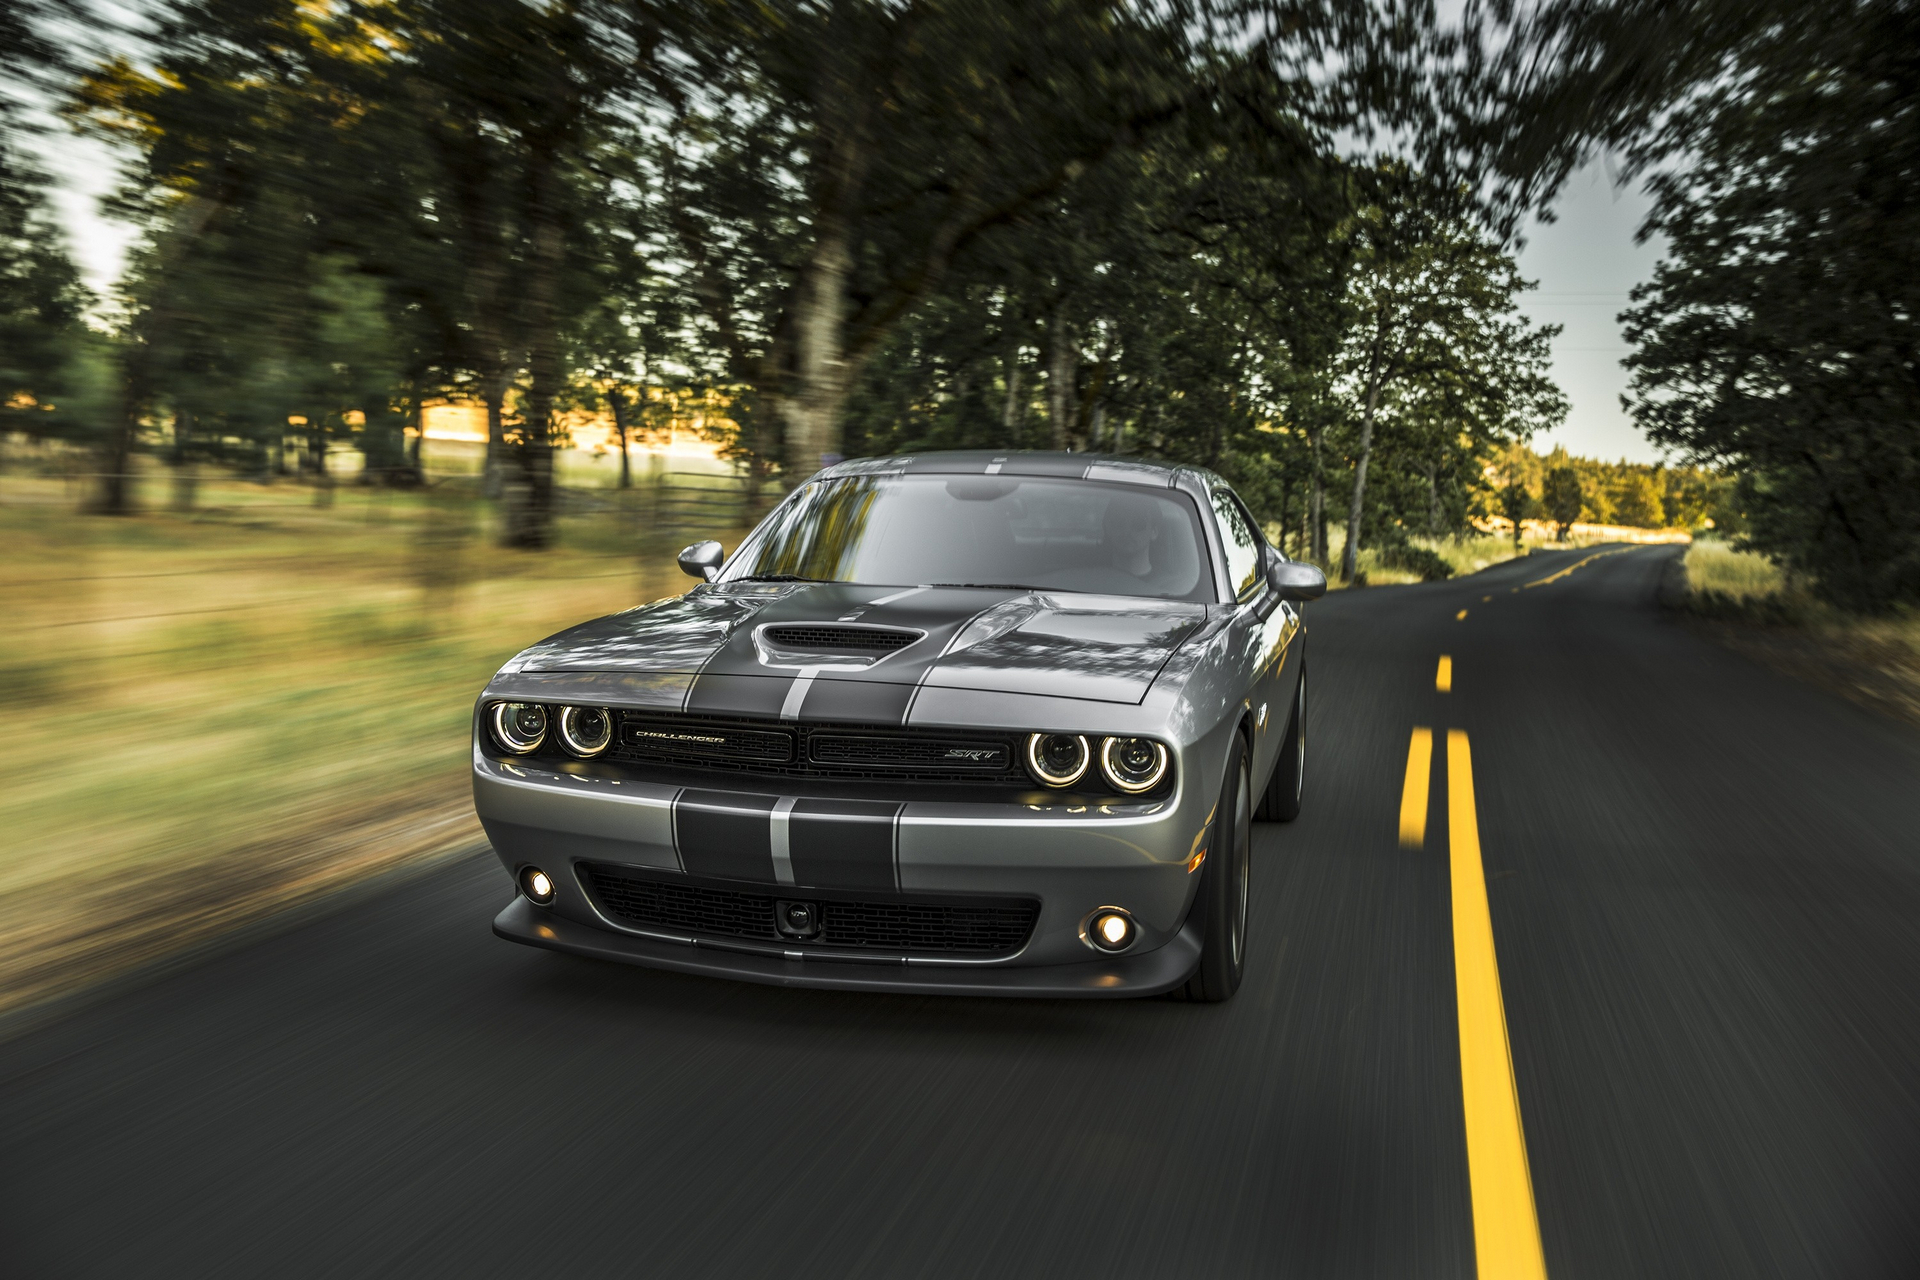 Where is the Dodge Challenger Made?